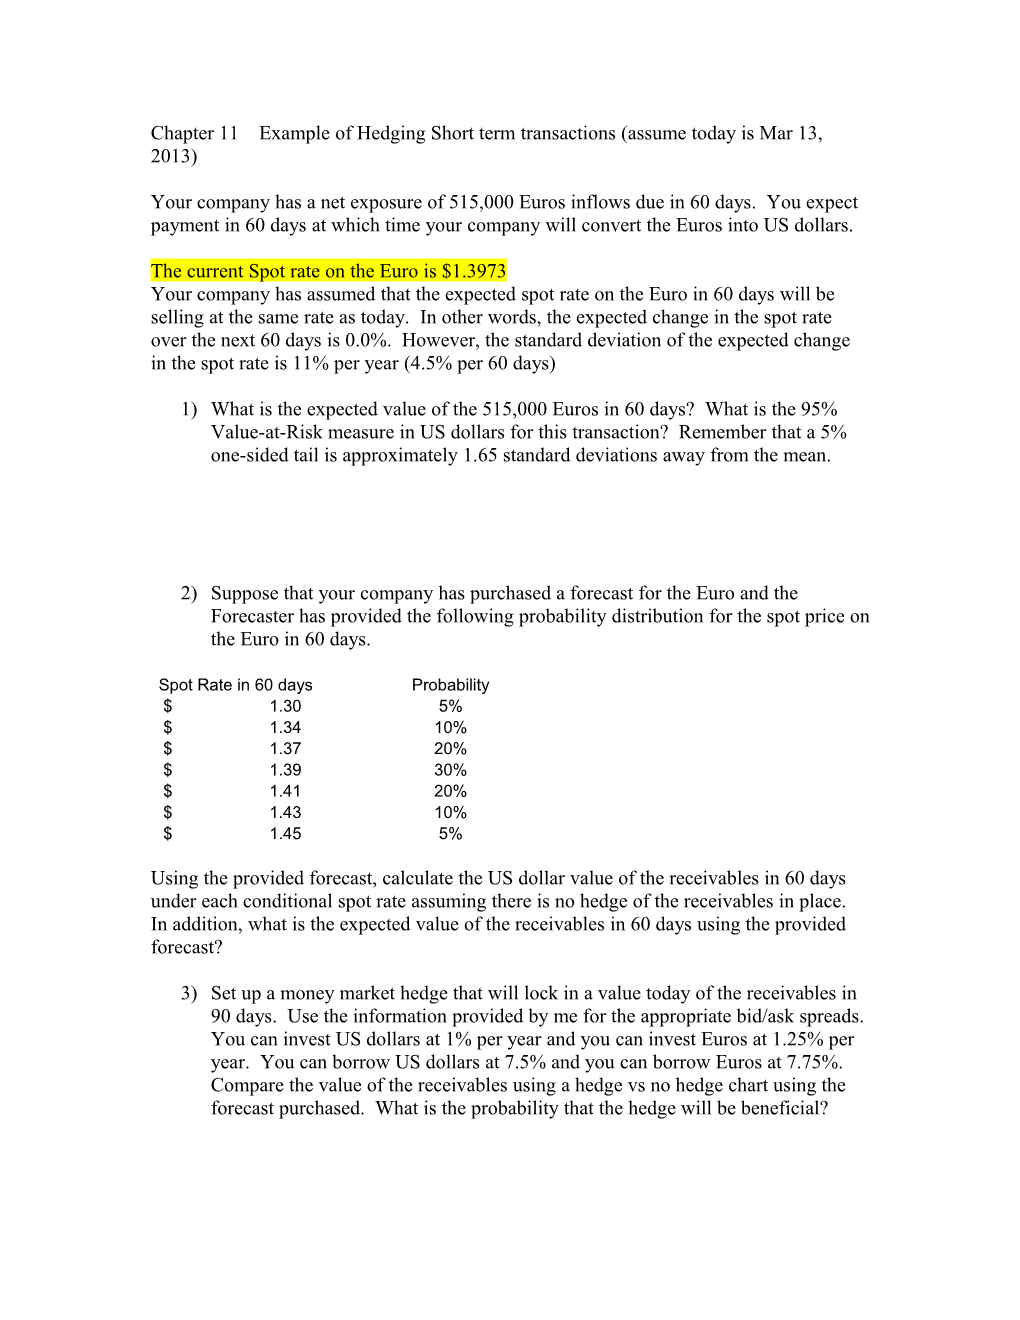 Chapter 11 Example of Hedging Short Term Transactions (Assume Today Is Mar13, 2013)